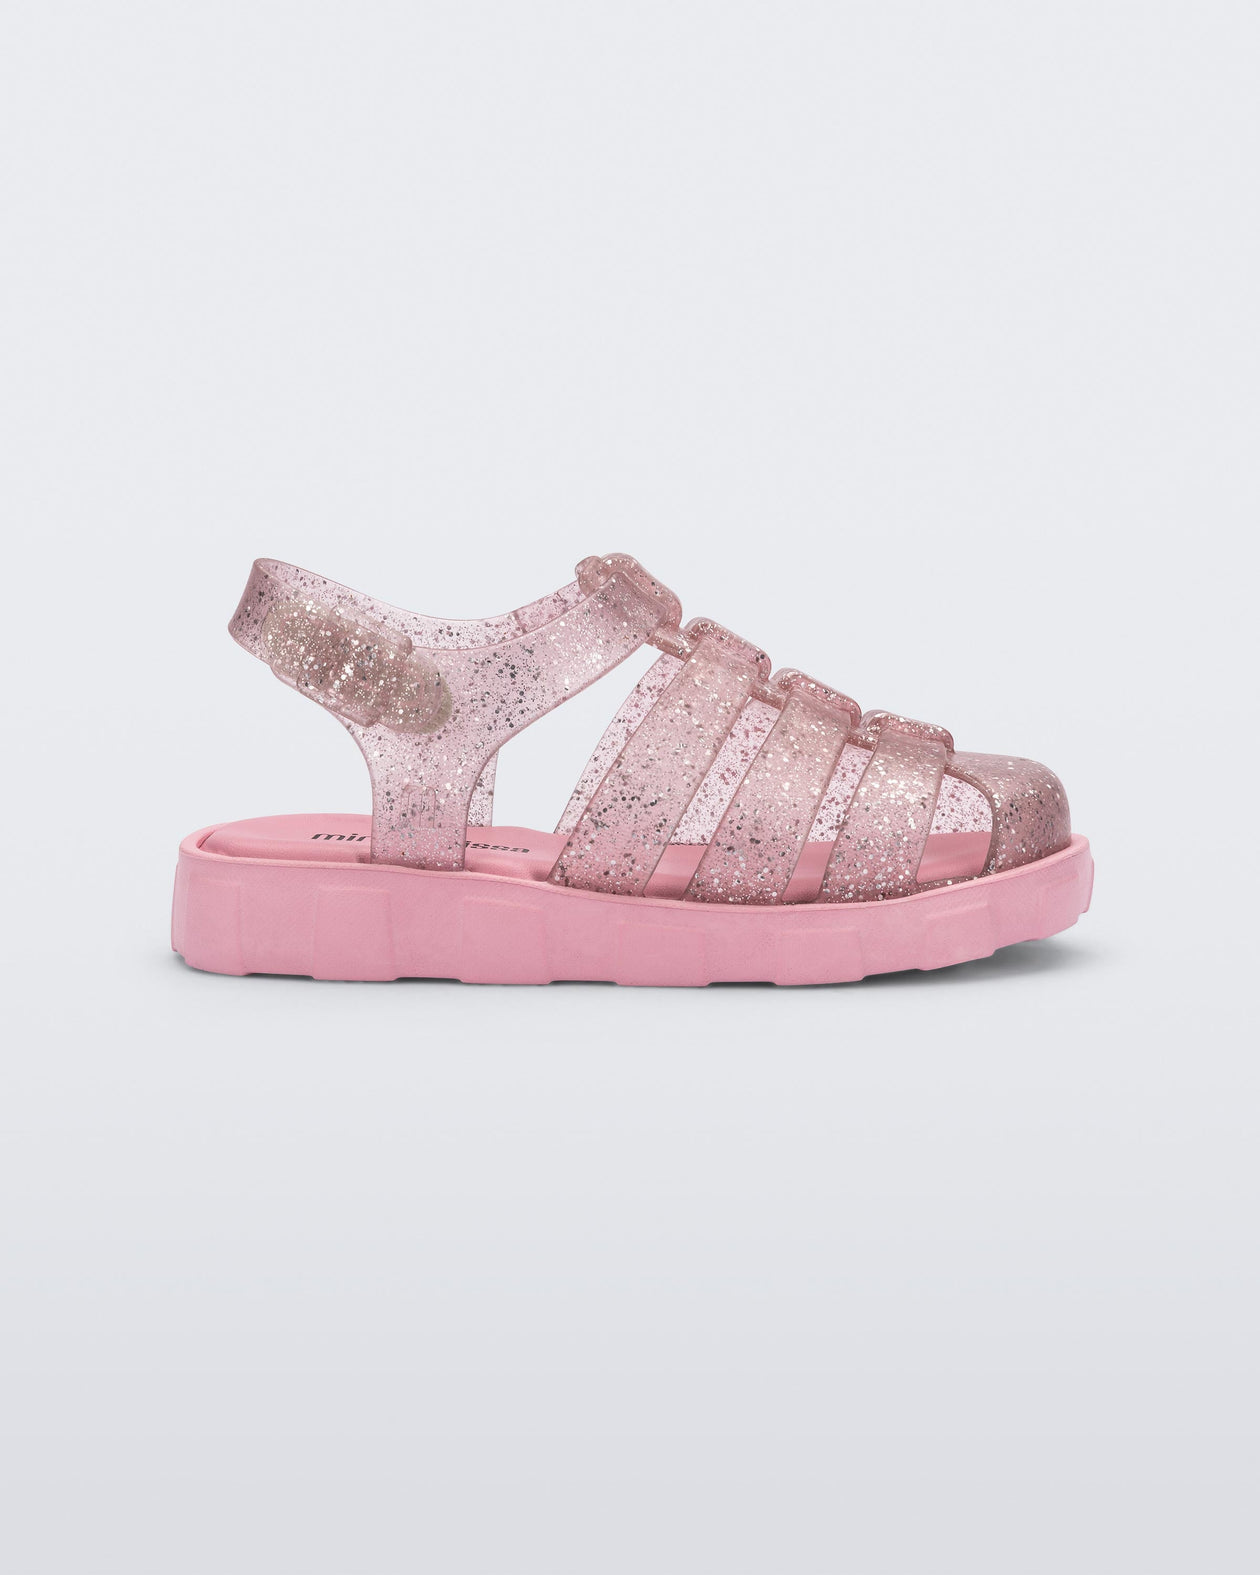 Side view of a glitter pink Megan baby sandal.